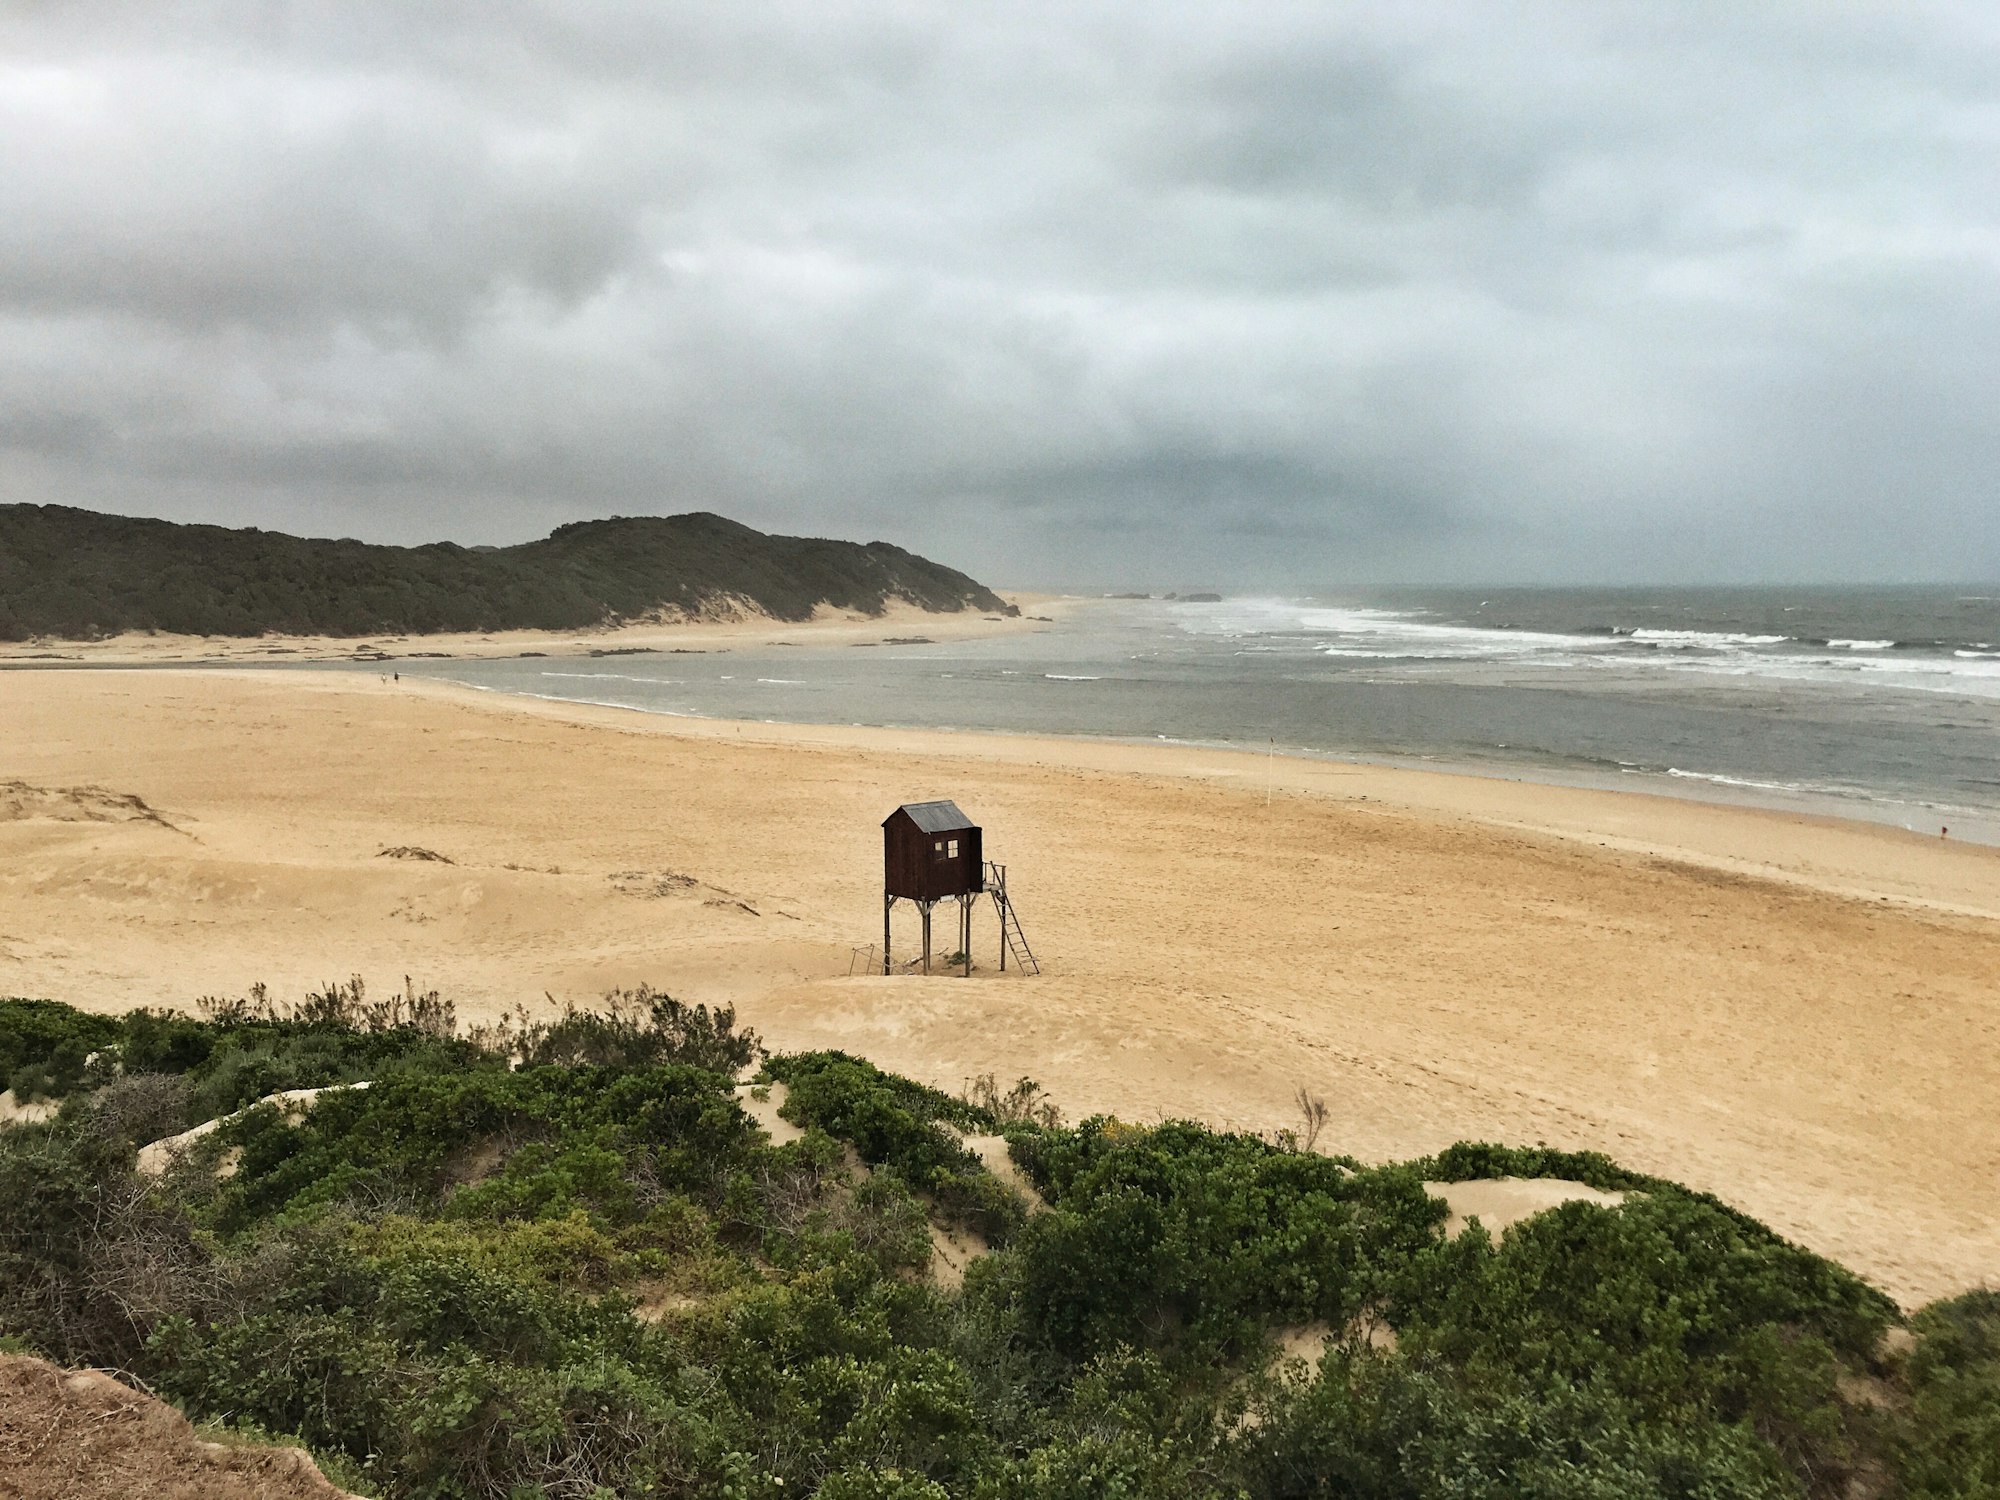 stormy day on the beach, lifeguard house